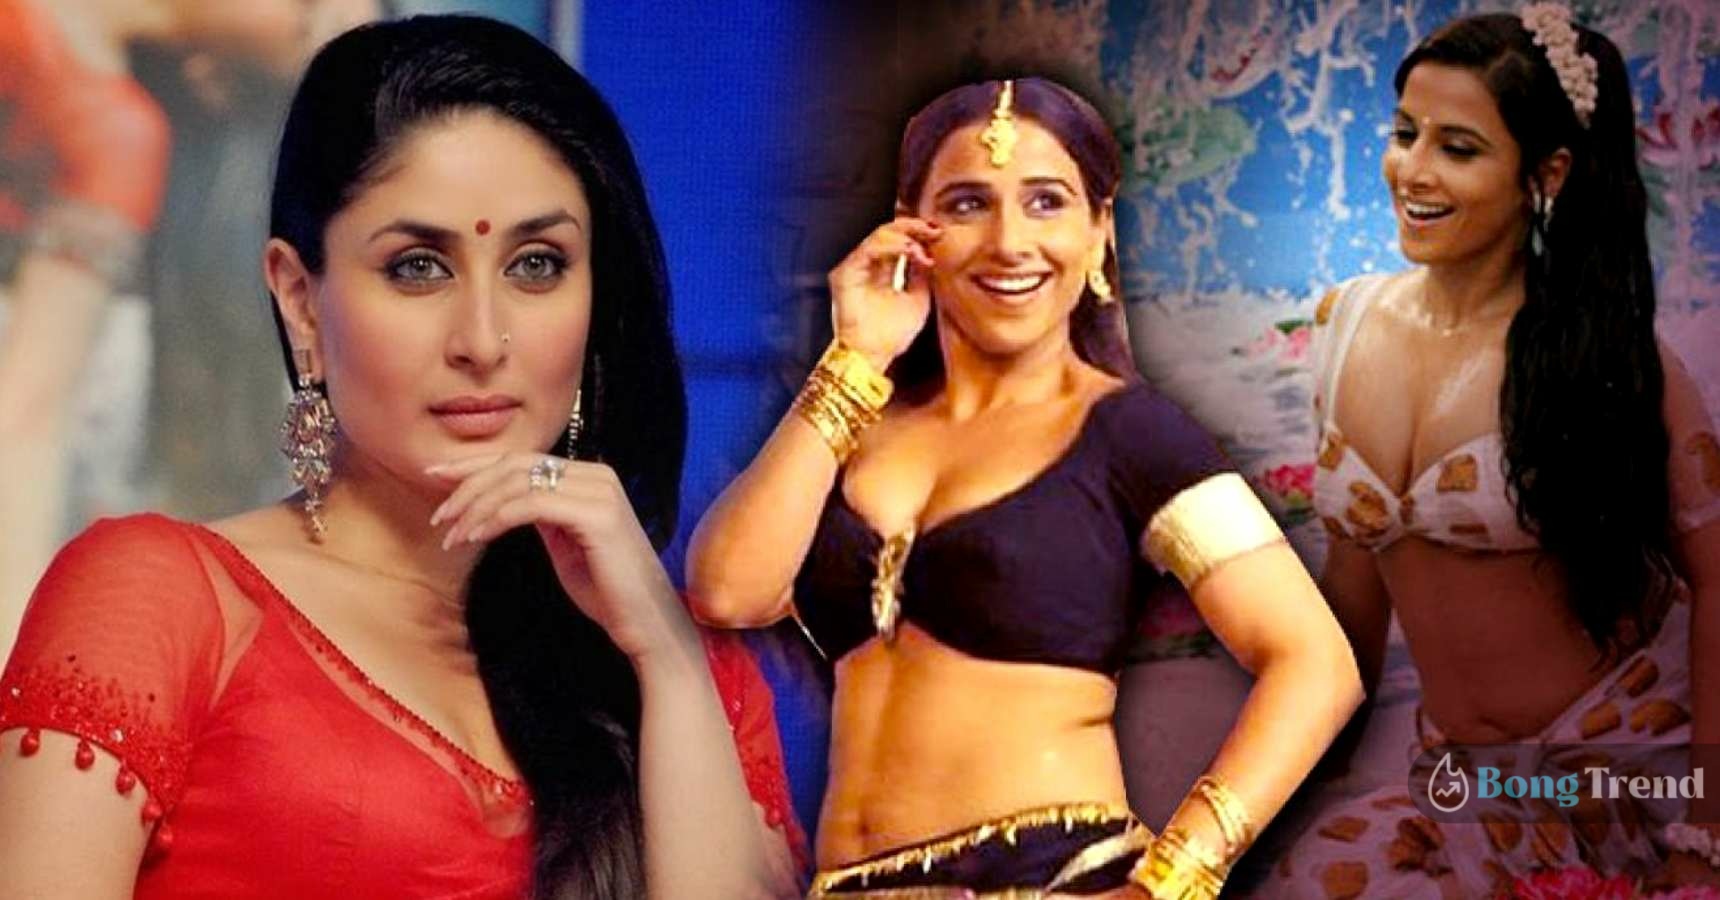 Kareena Kapoor wanted to work in Dirty Picture like movie